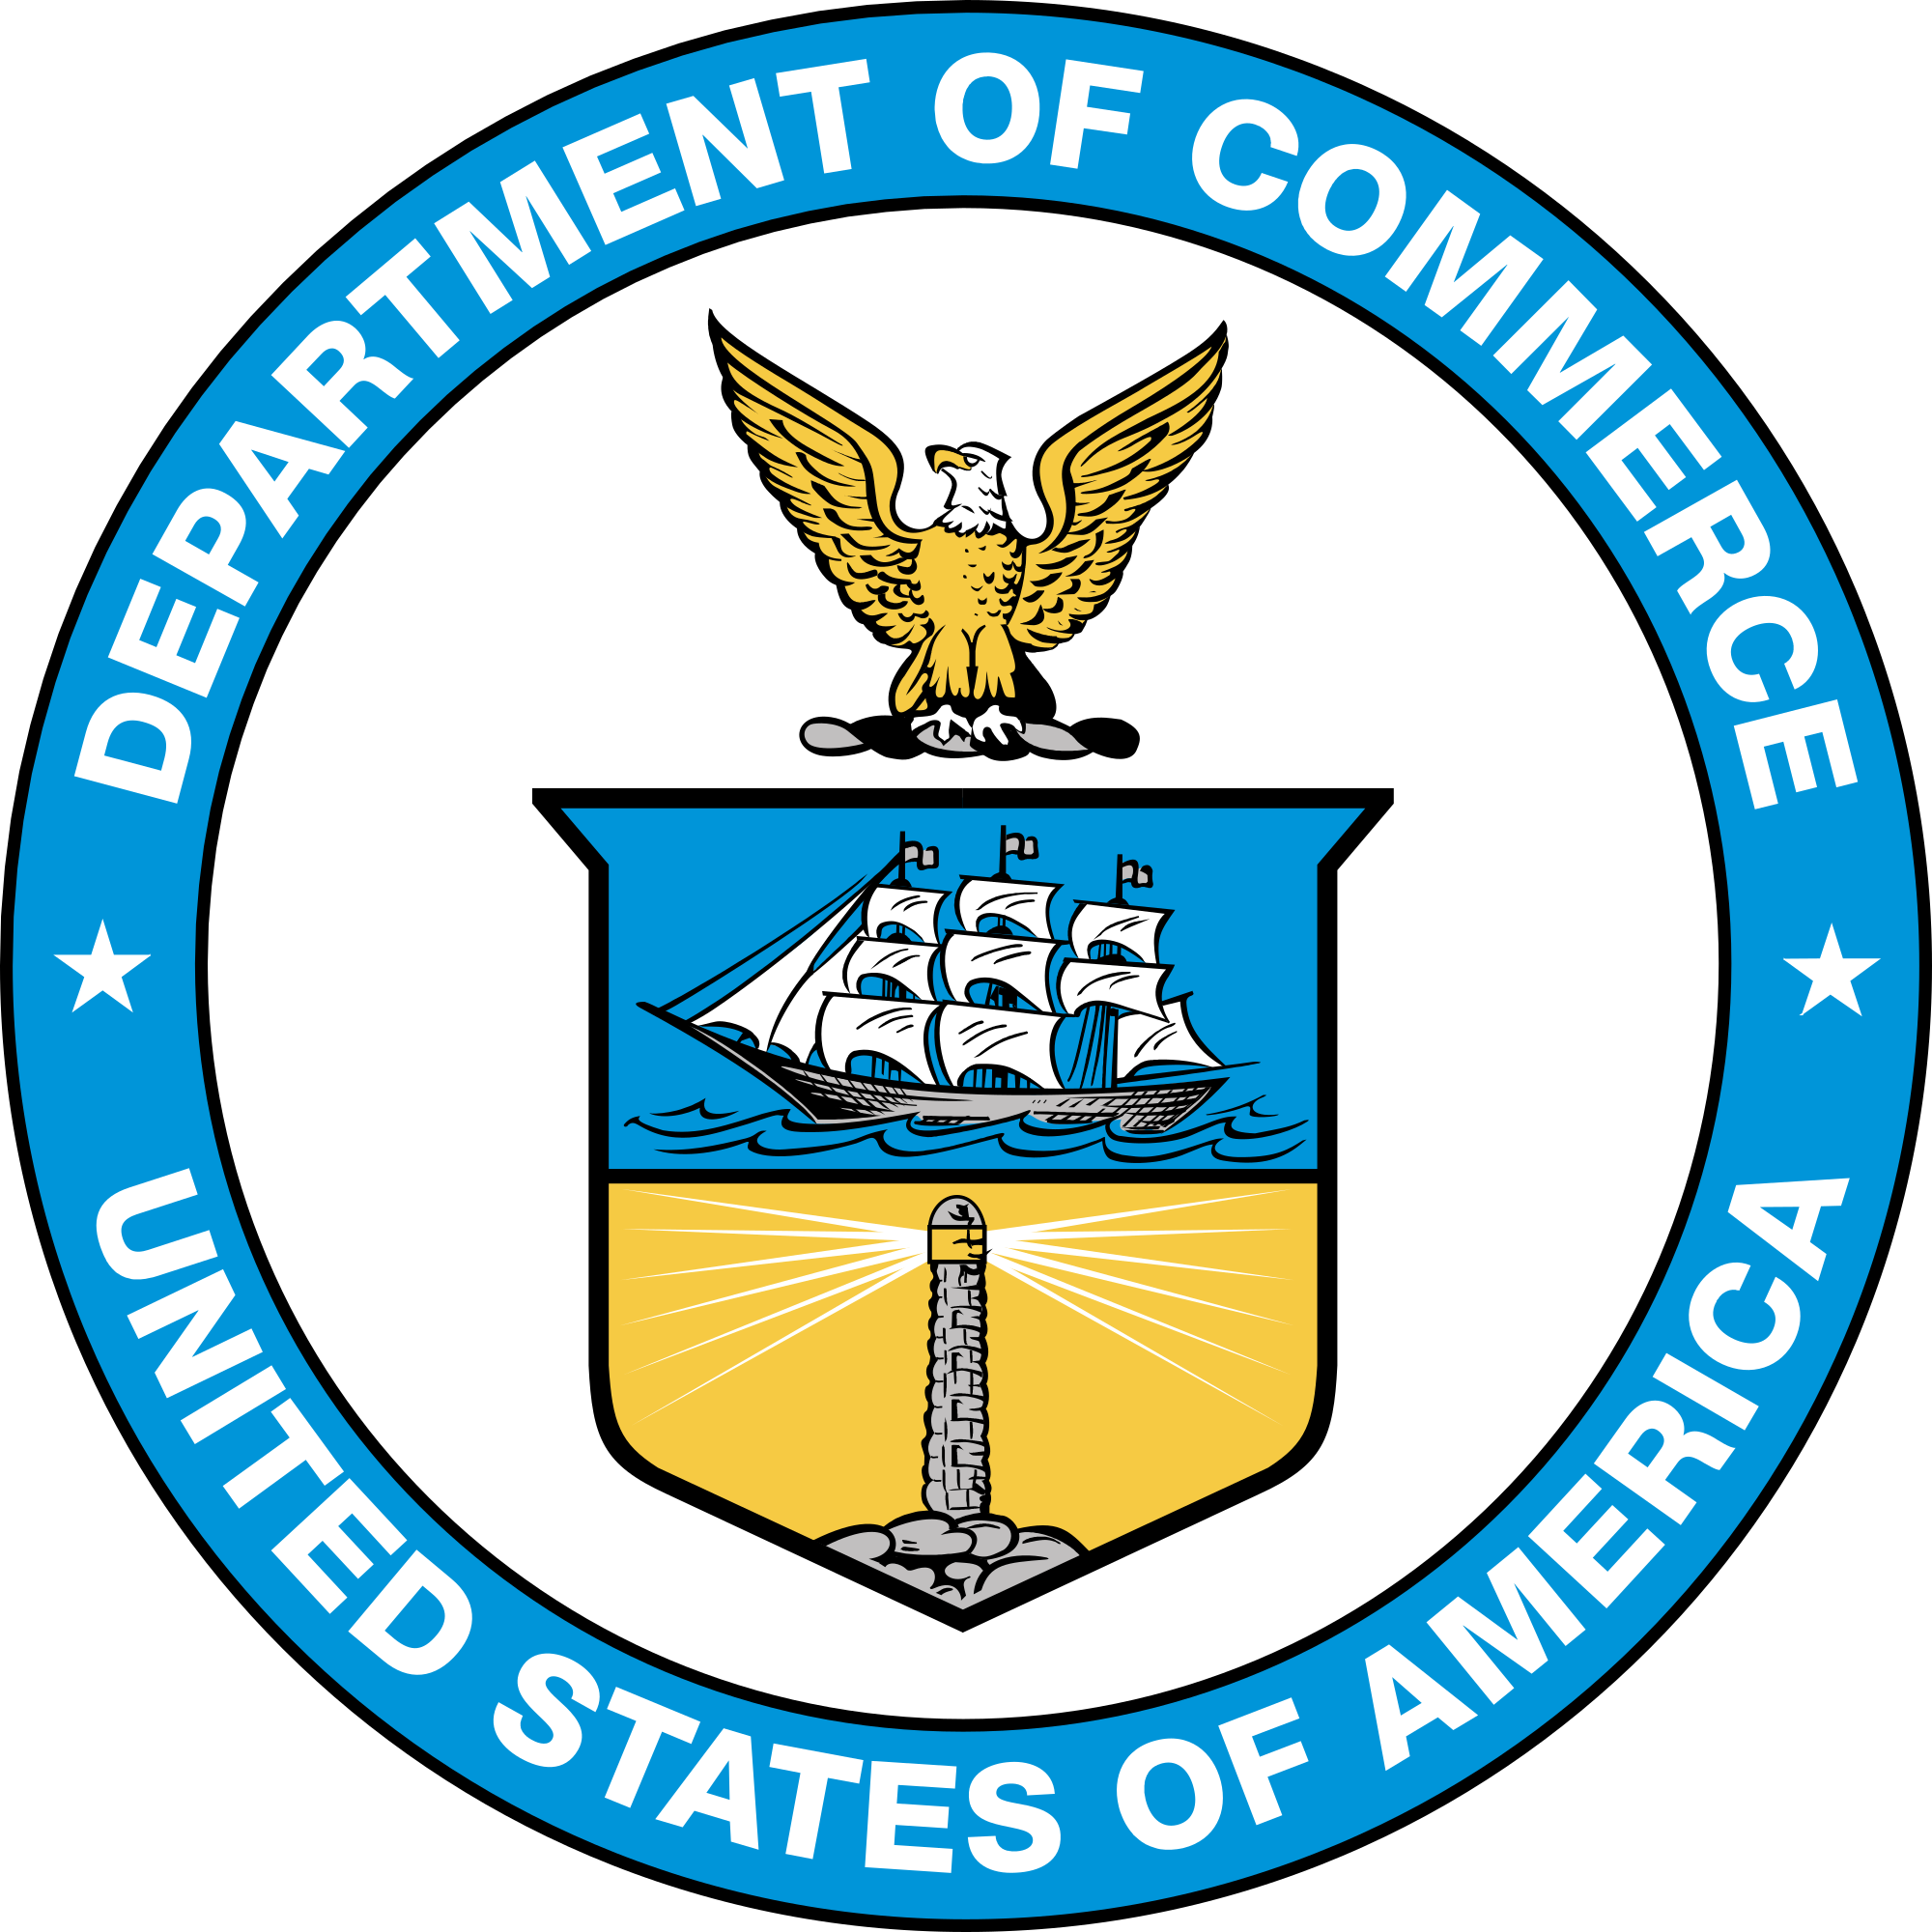 Seal of the United States Department of Commerce.svg